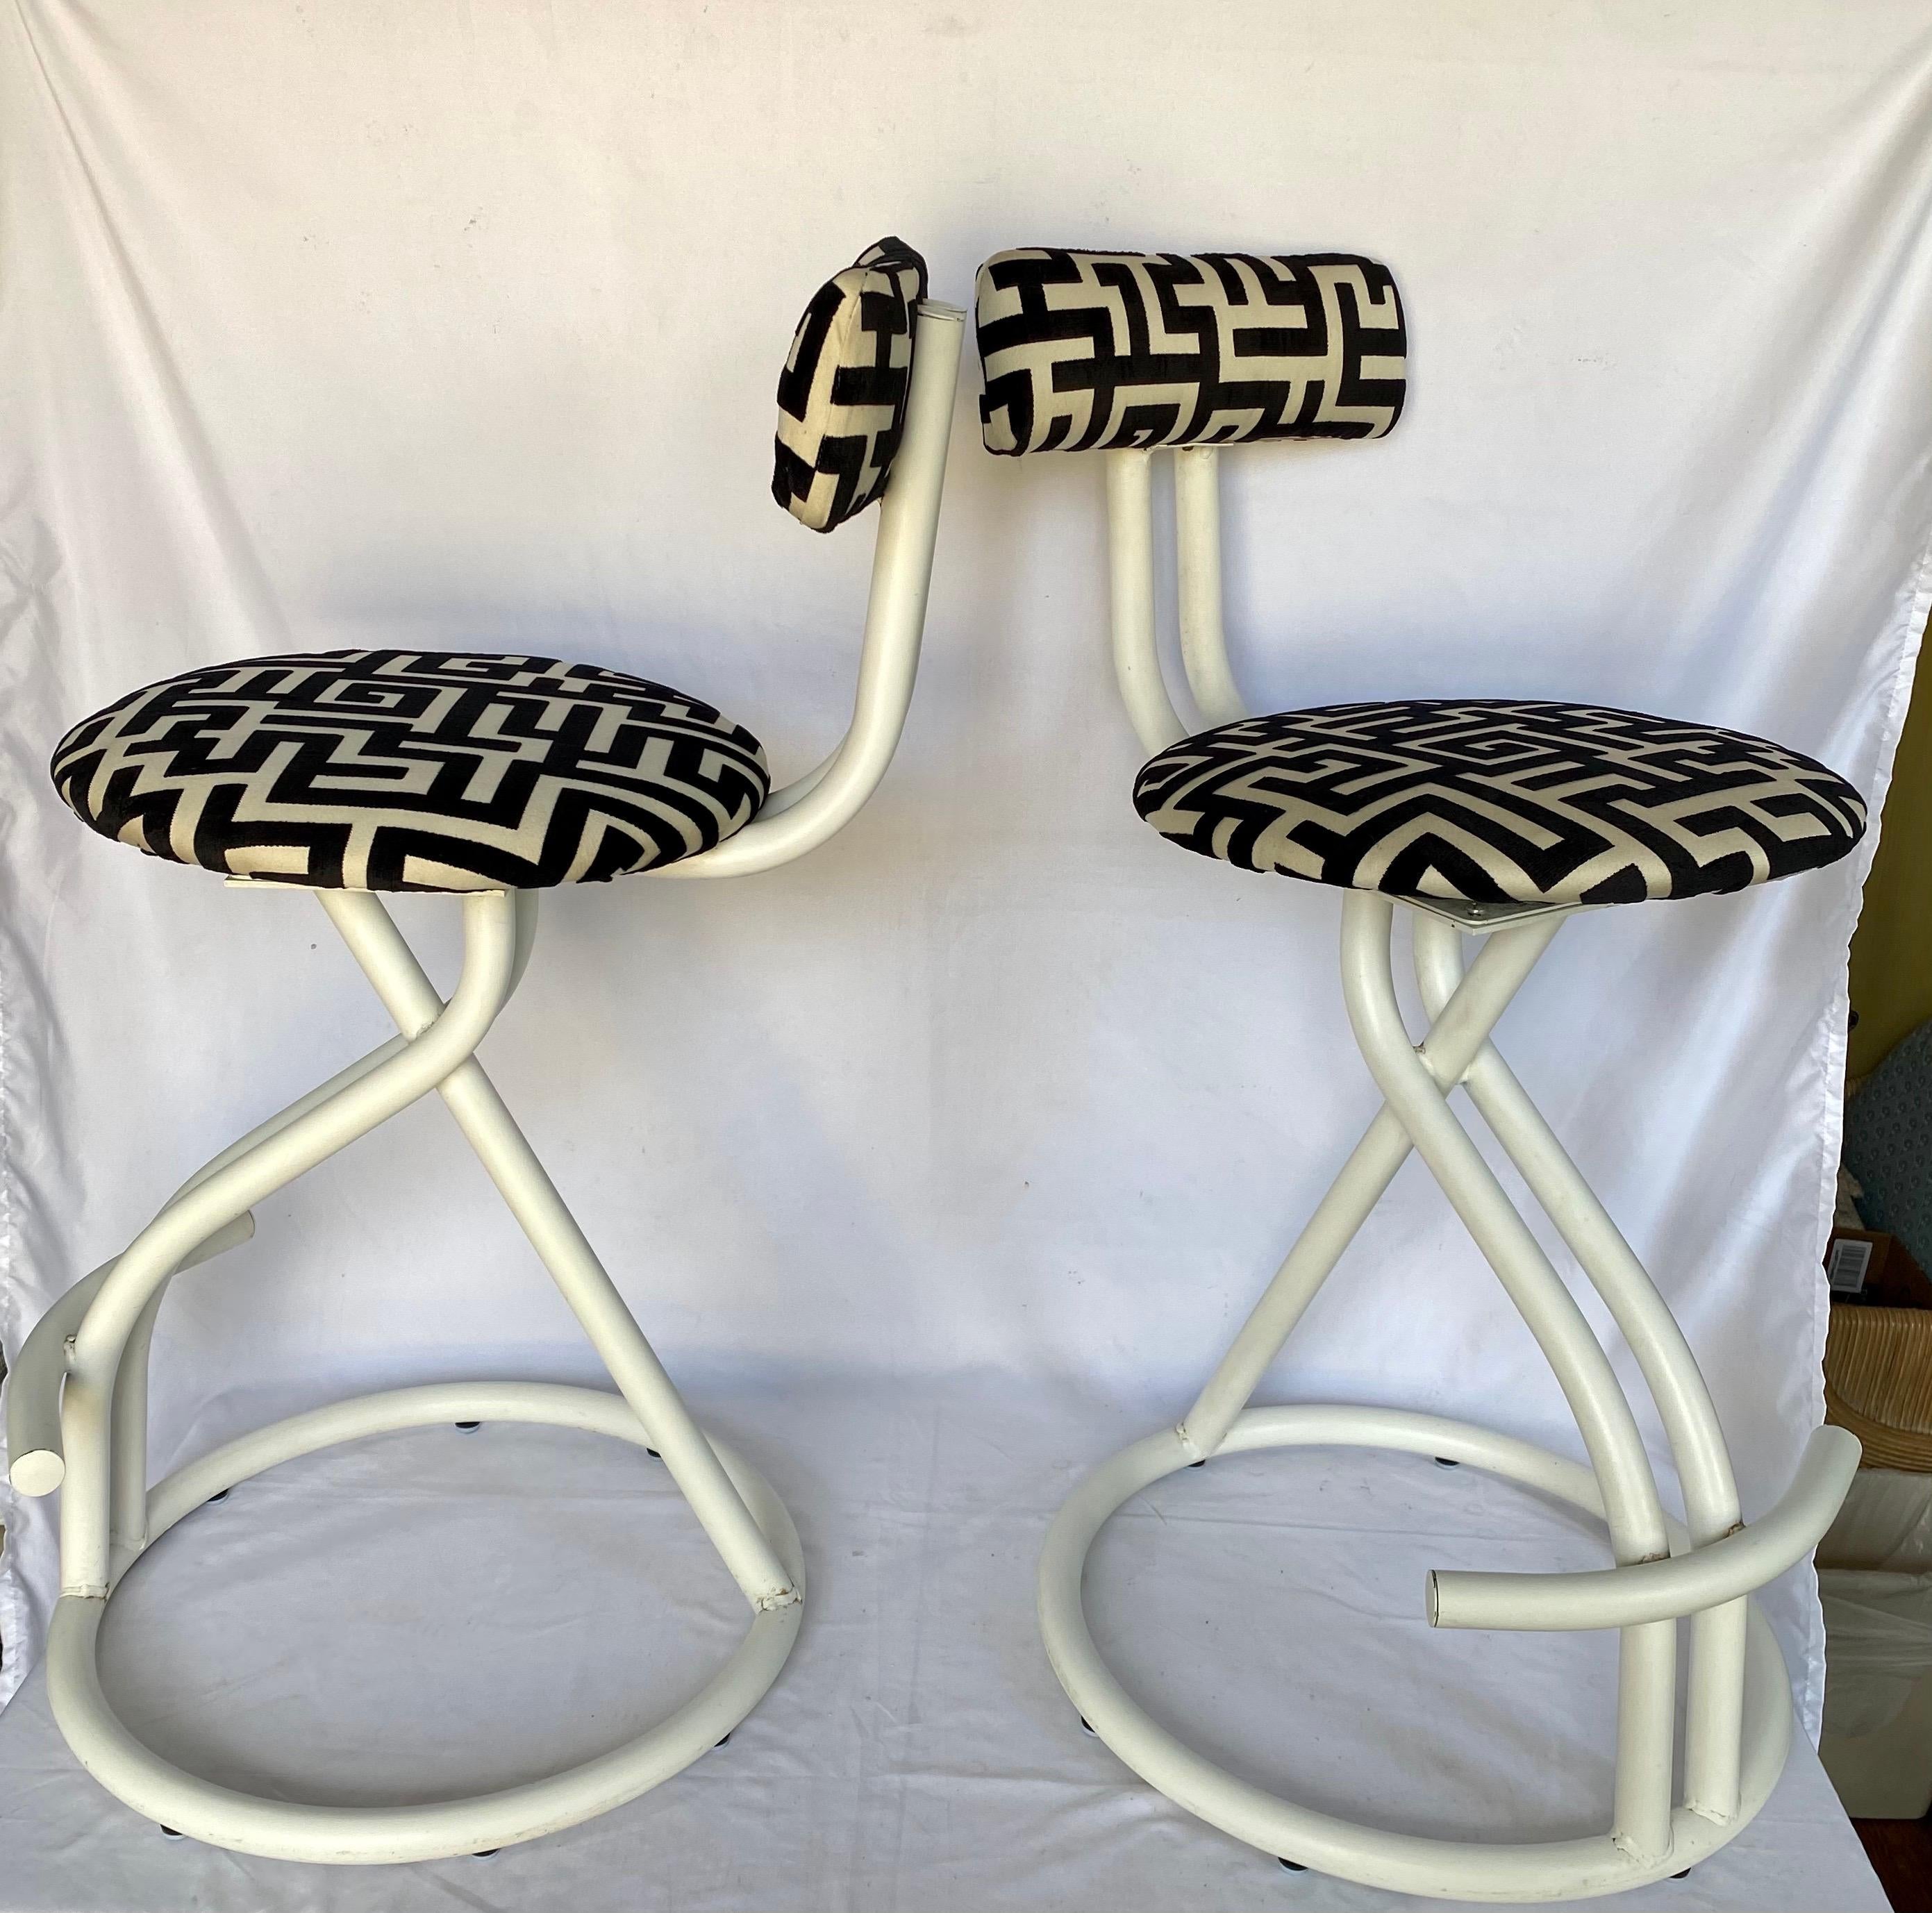 Pair of post modern Memphis Milano style swivel stools by Cal-Style. These sculptural counter bar stools feature cream powder coated tubular frames and have been professionally reupholstered in a luxurious graphic Jim Thompson Greek key inspired cut